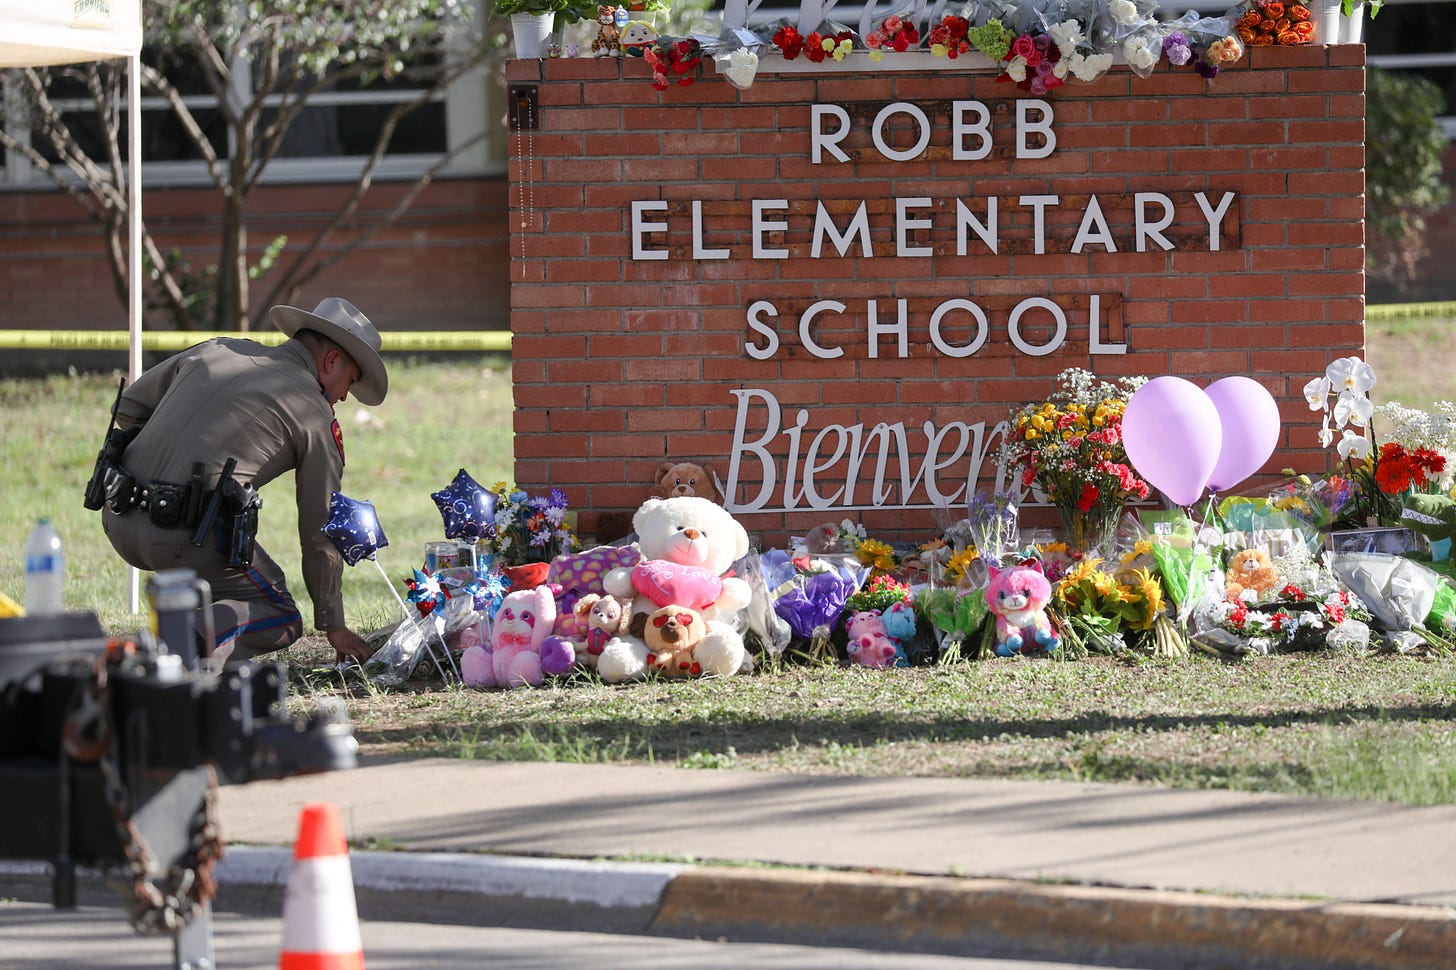 A view from the makeshift memorial in front of Robb Elementary School in Uvalde, Texas, on May 25, 2022. Flowers are placed on a makeshift memorial. - The tight-knit Latino community of Uvalde was wracked with grief Wednesday after a teen in body armor marched into the school and killed 19 children and two teachers, in the latest spasm of deadly gun violence in the US. Texas state troopers outside Robb Elementary School 19 students and one teacher were killed during a massacre in a Texas elementary school, the deadliest US school shooting. (Photo by Yasin Ozturk/Anadolu Agency via Getty Images)